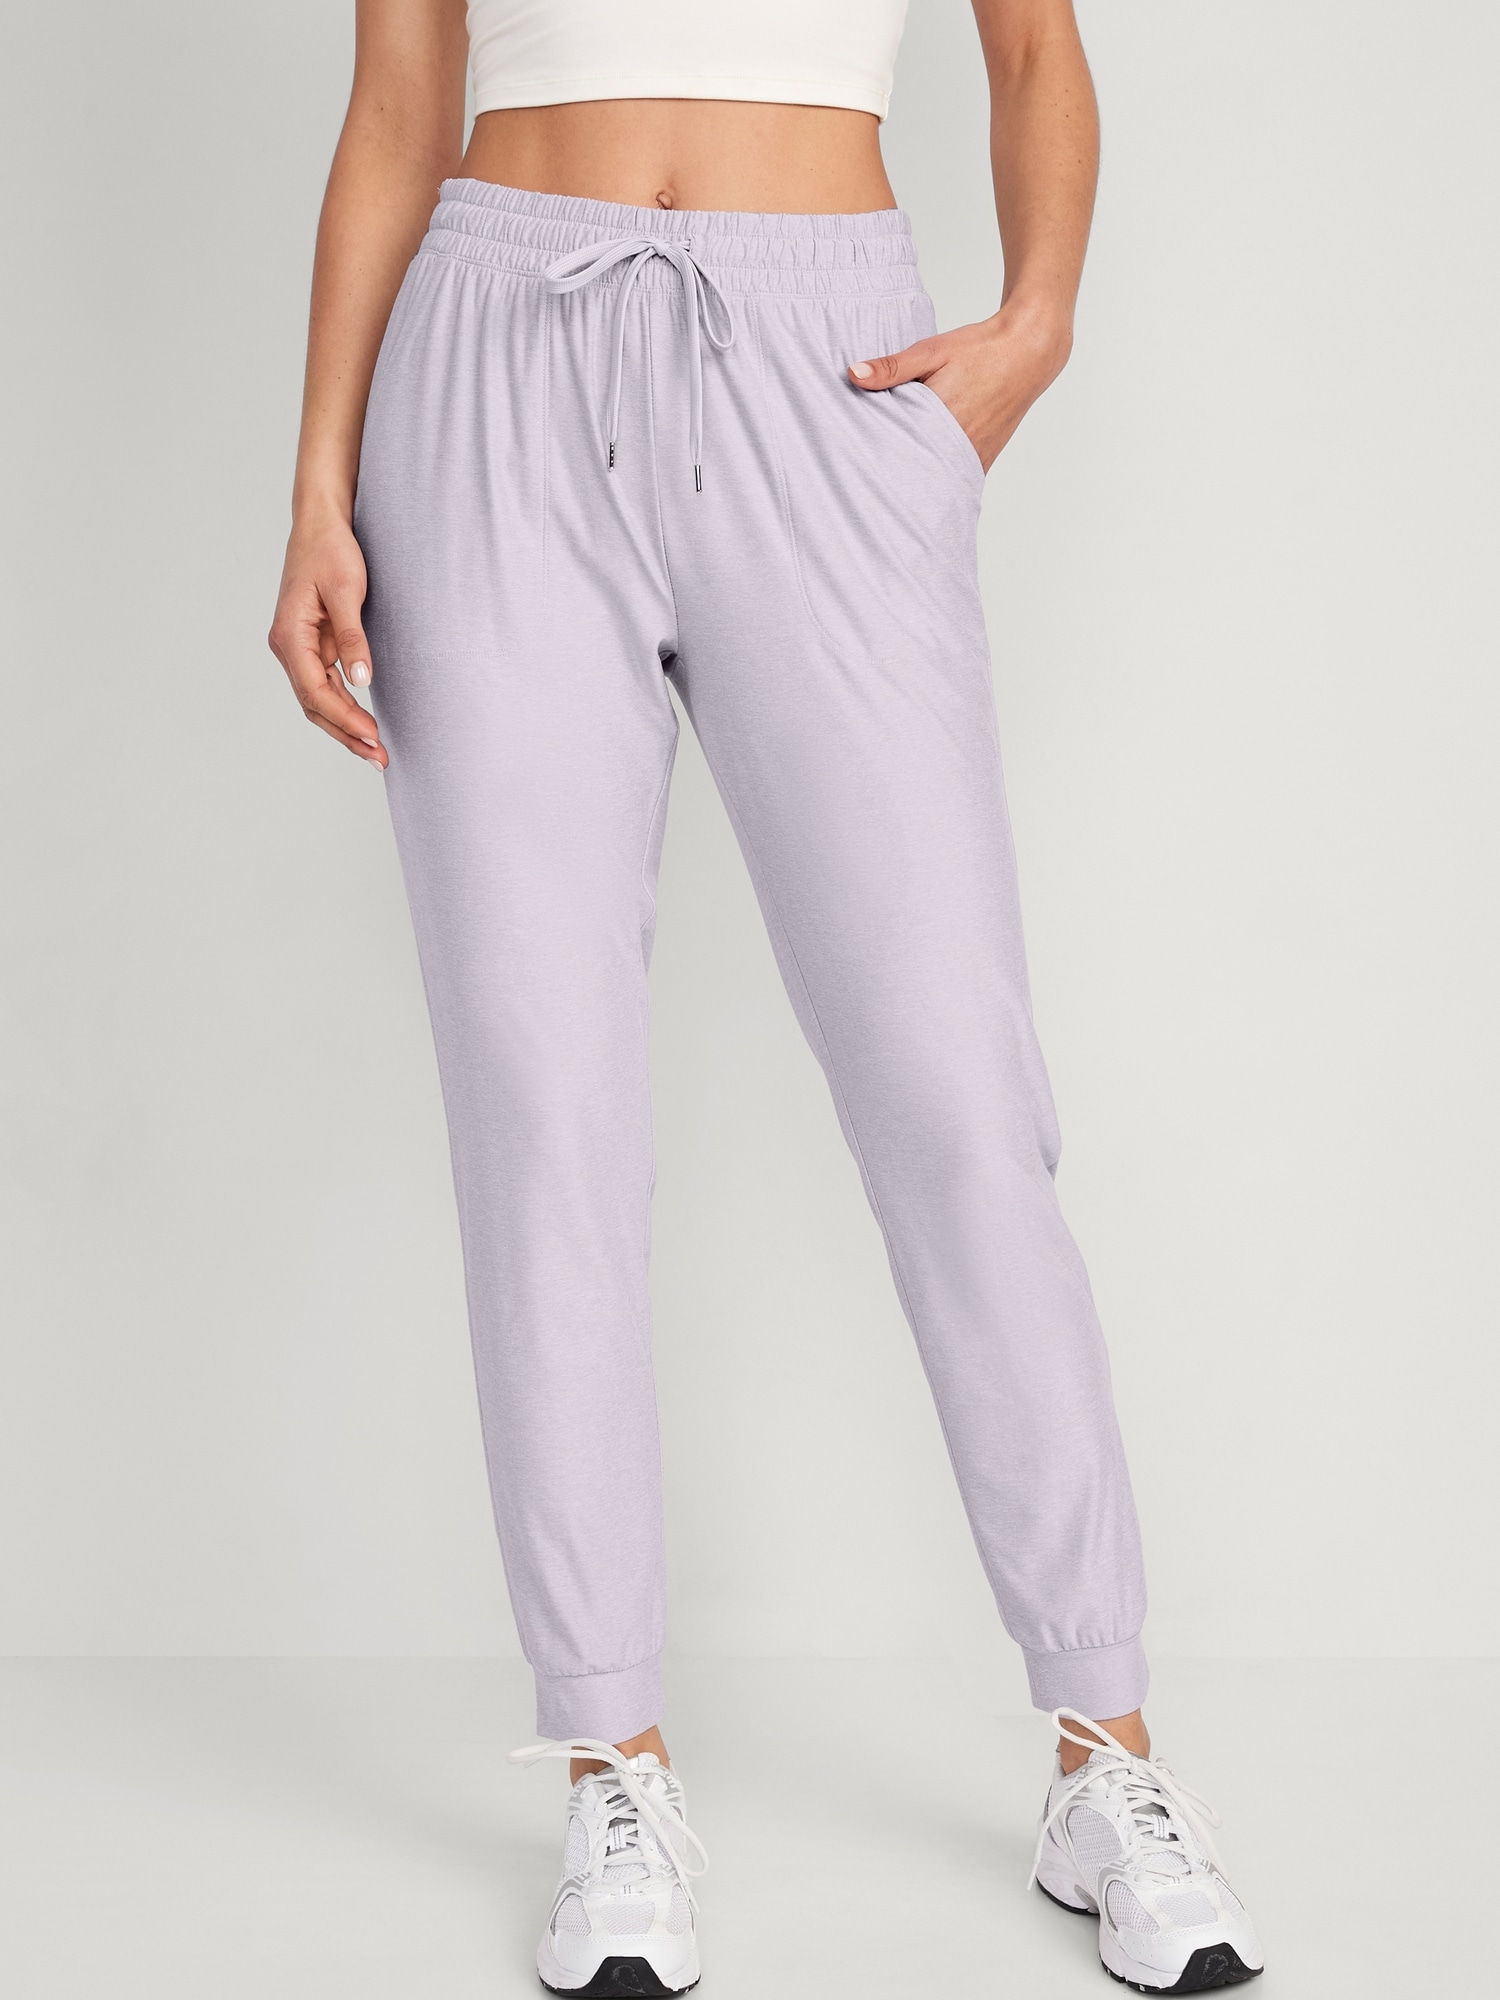 Old Navy Women's High Rise Cloud Joggers